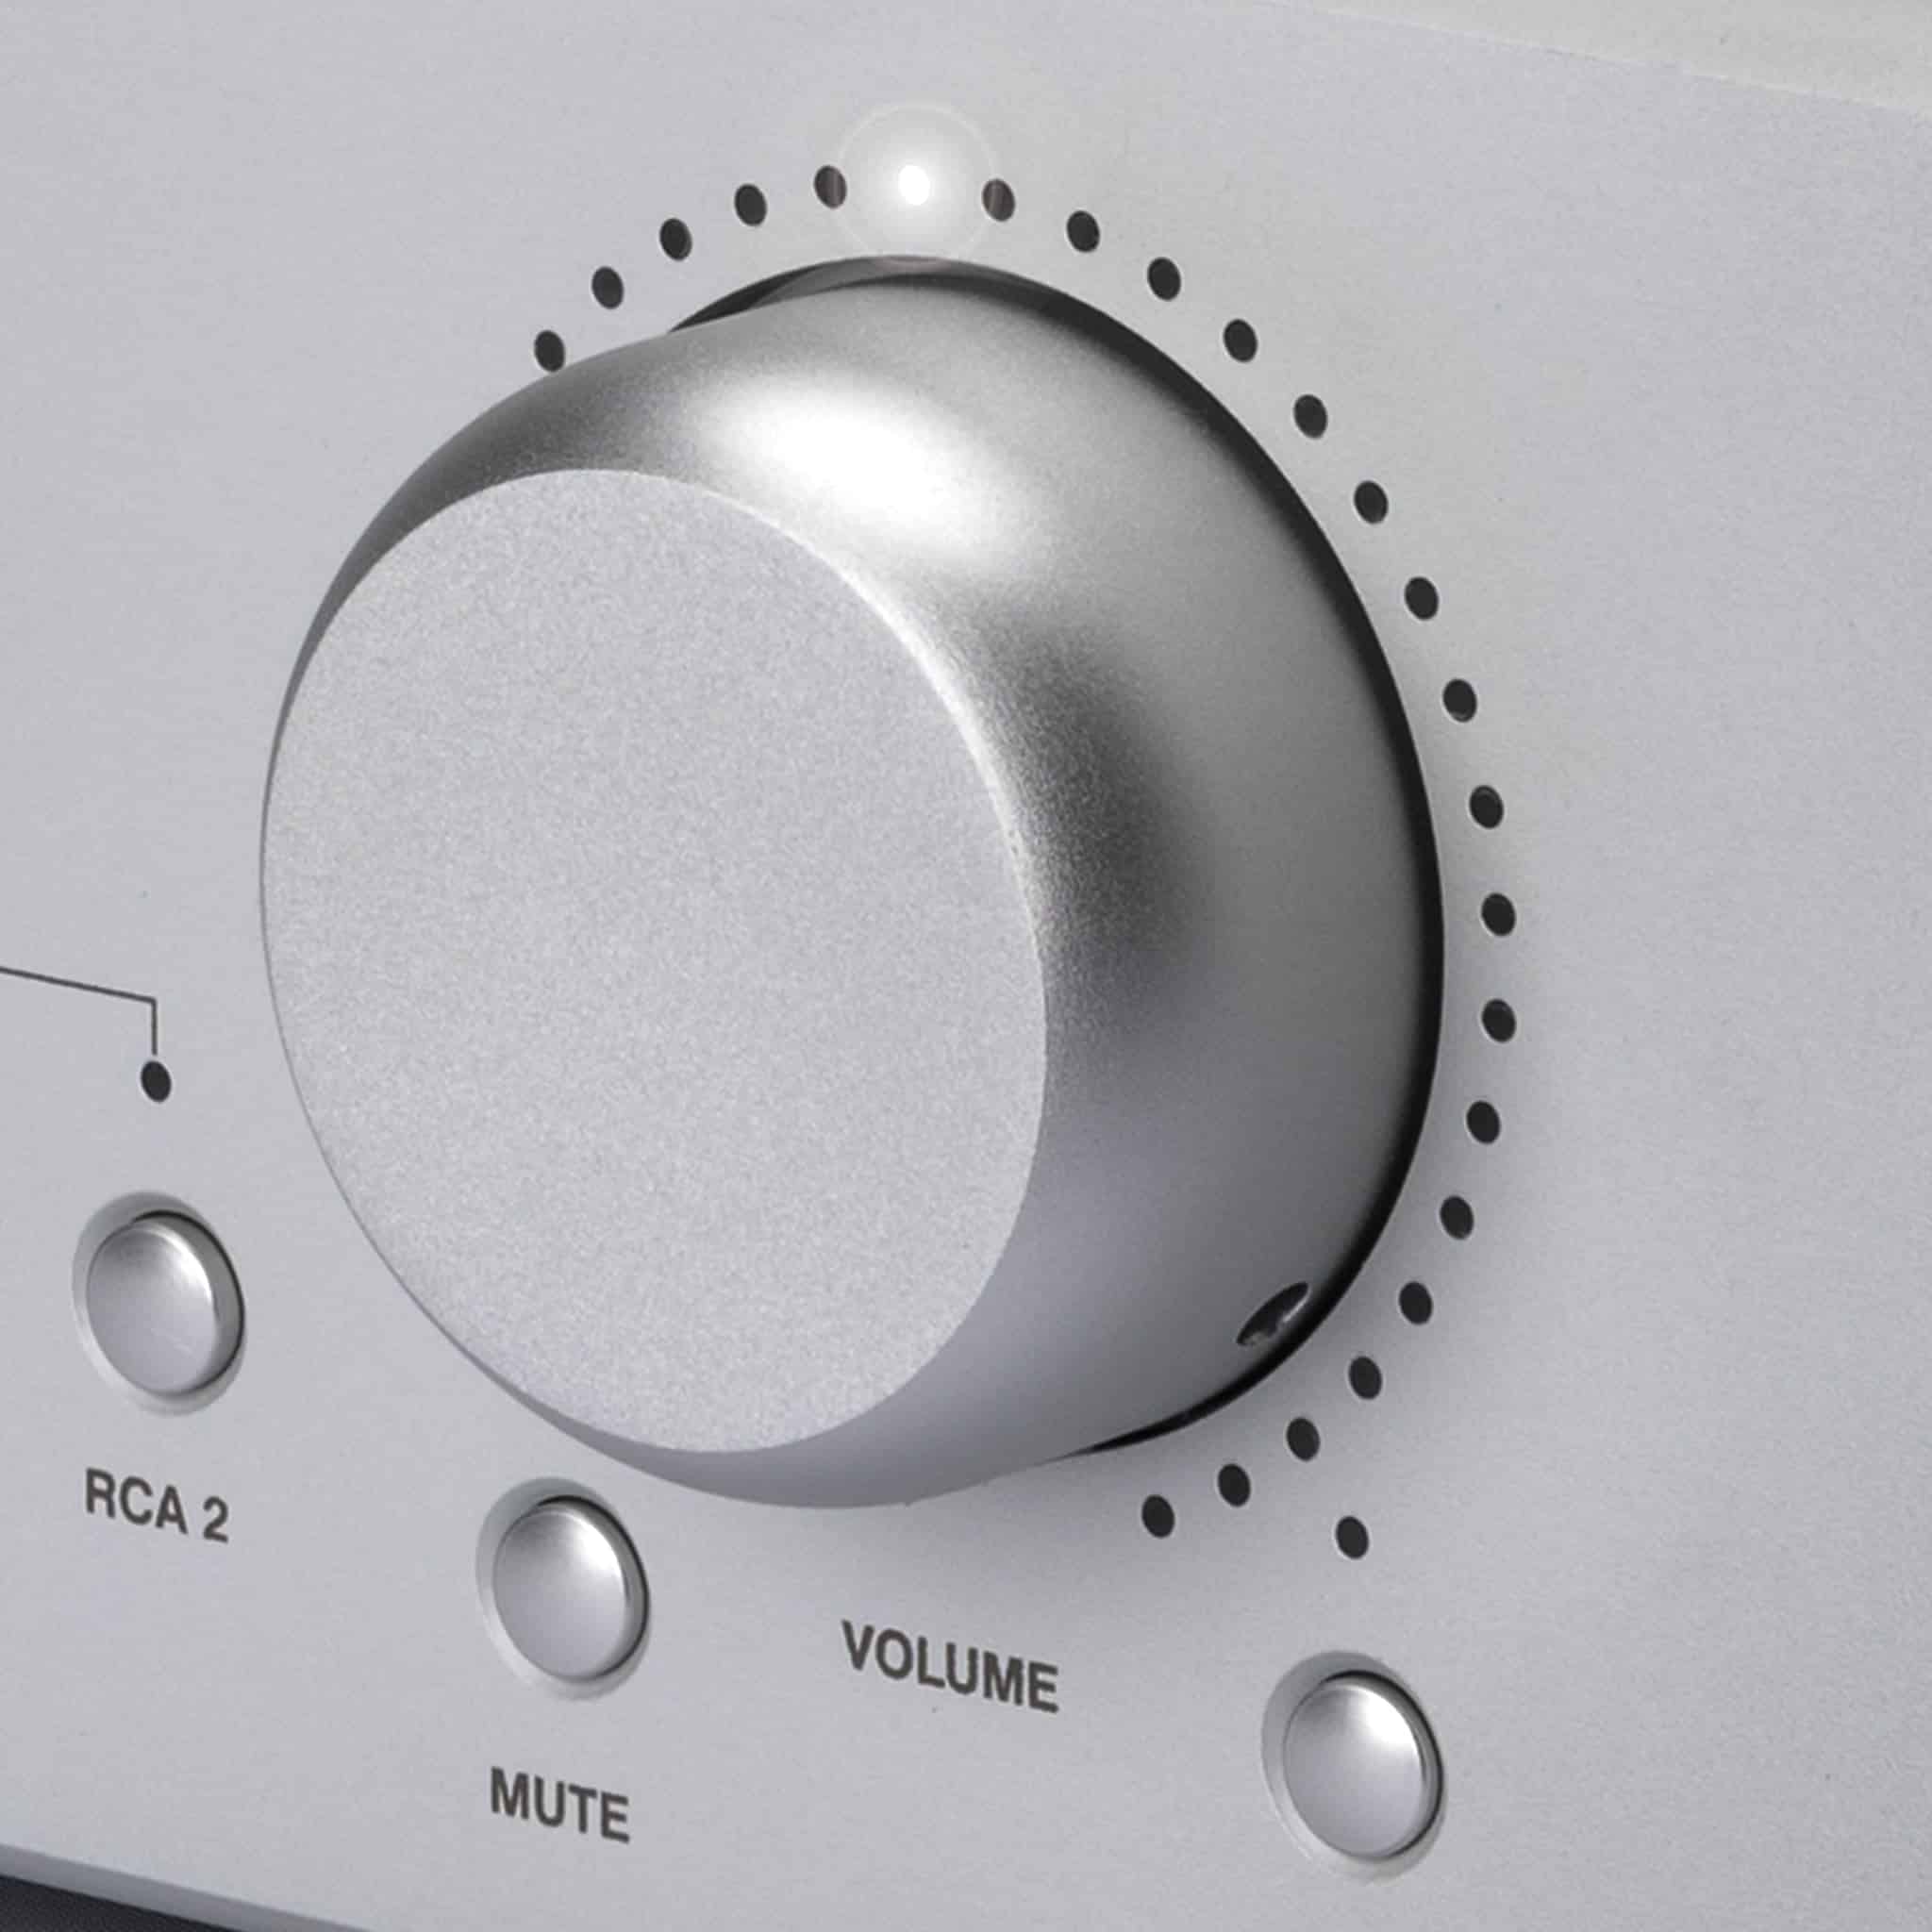 LED ring around volume control indicates loudness and can be easily seen from listening position